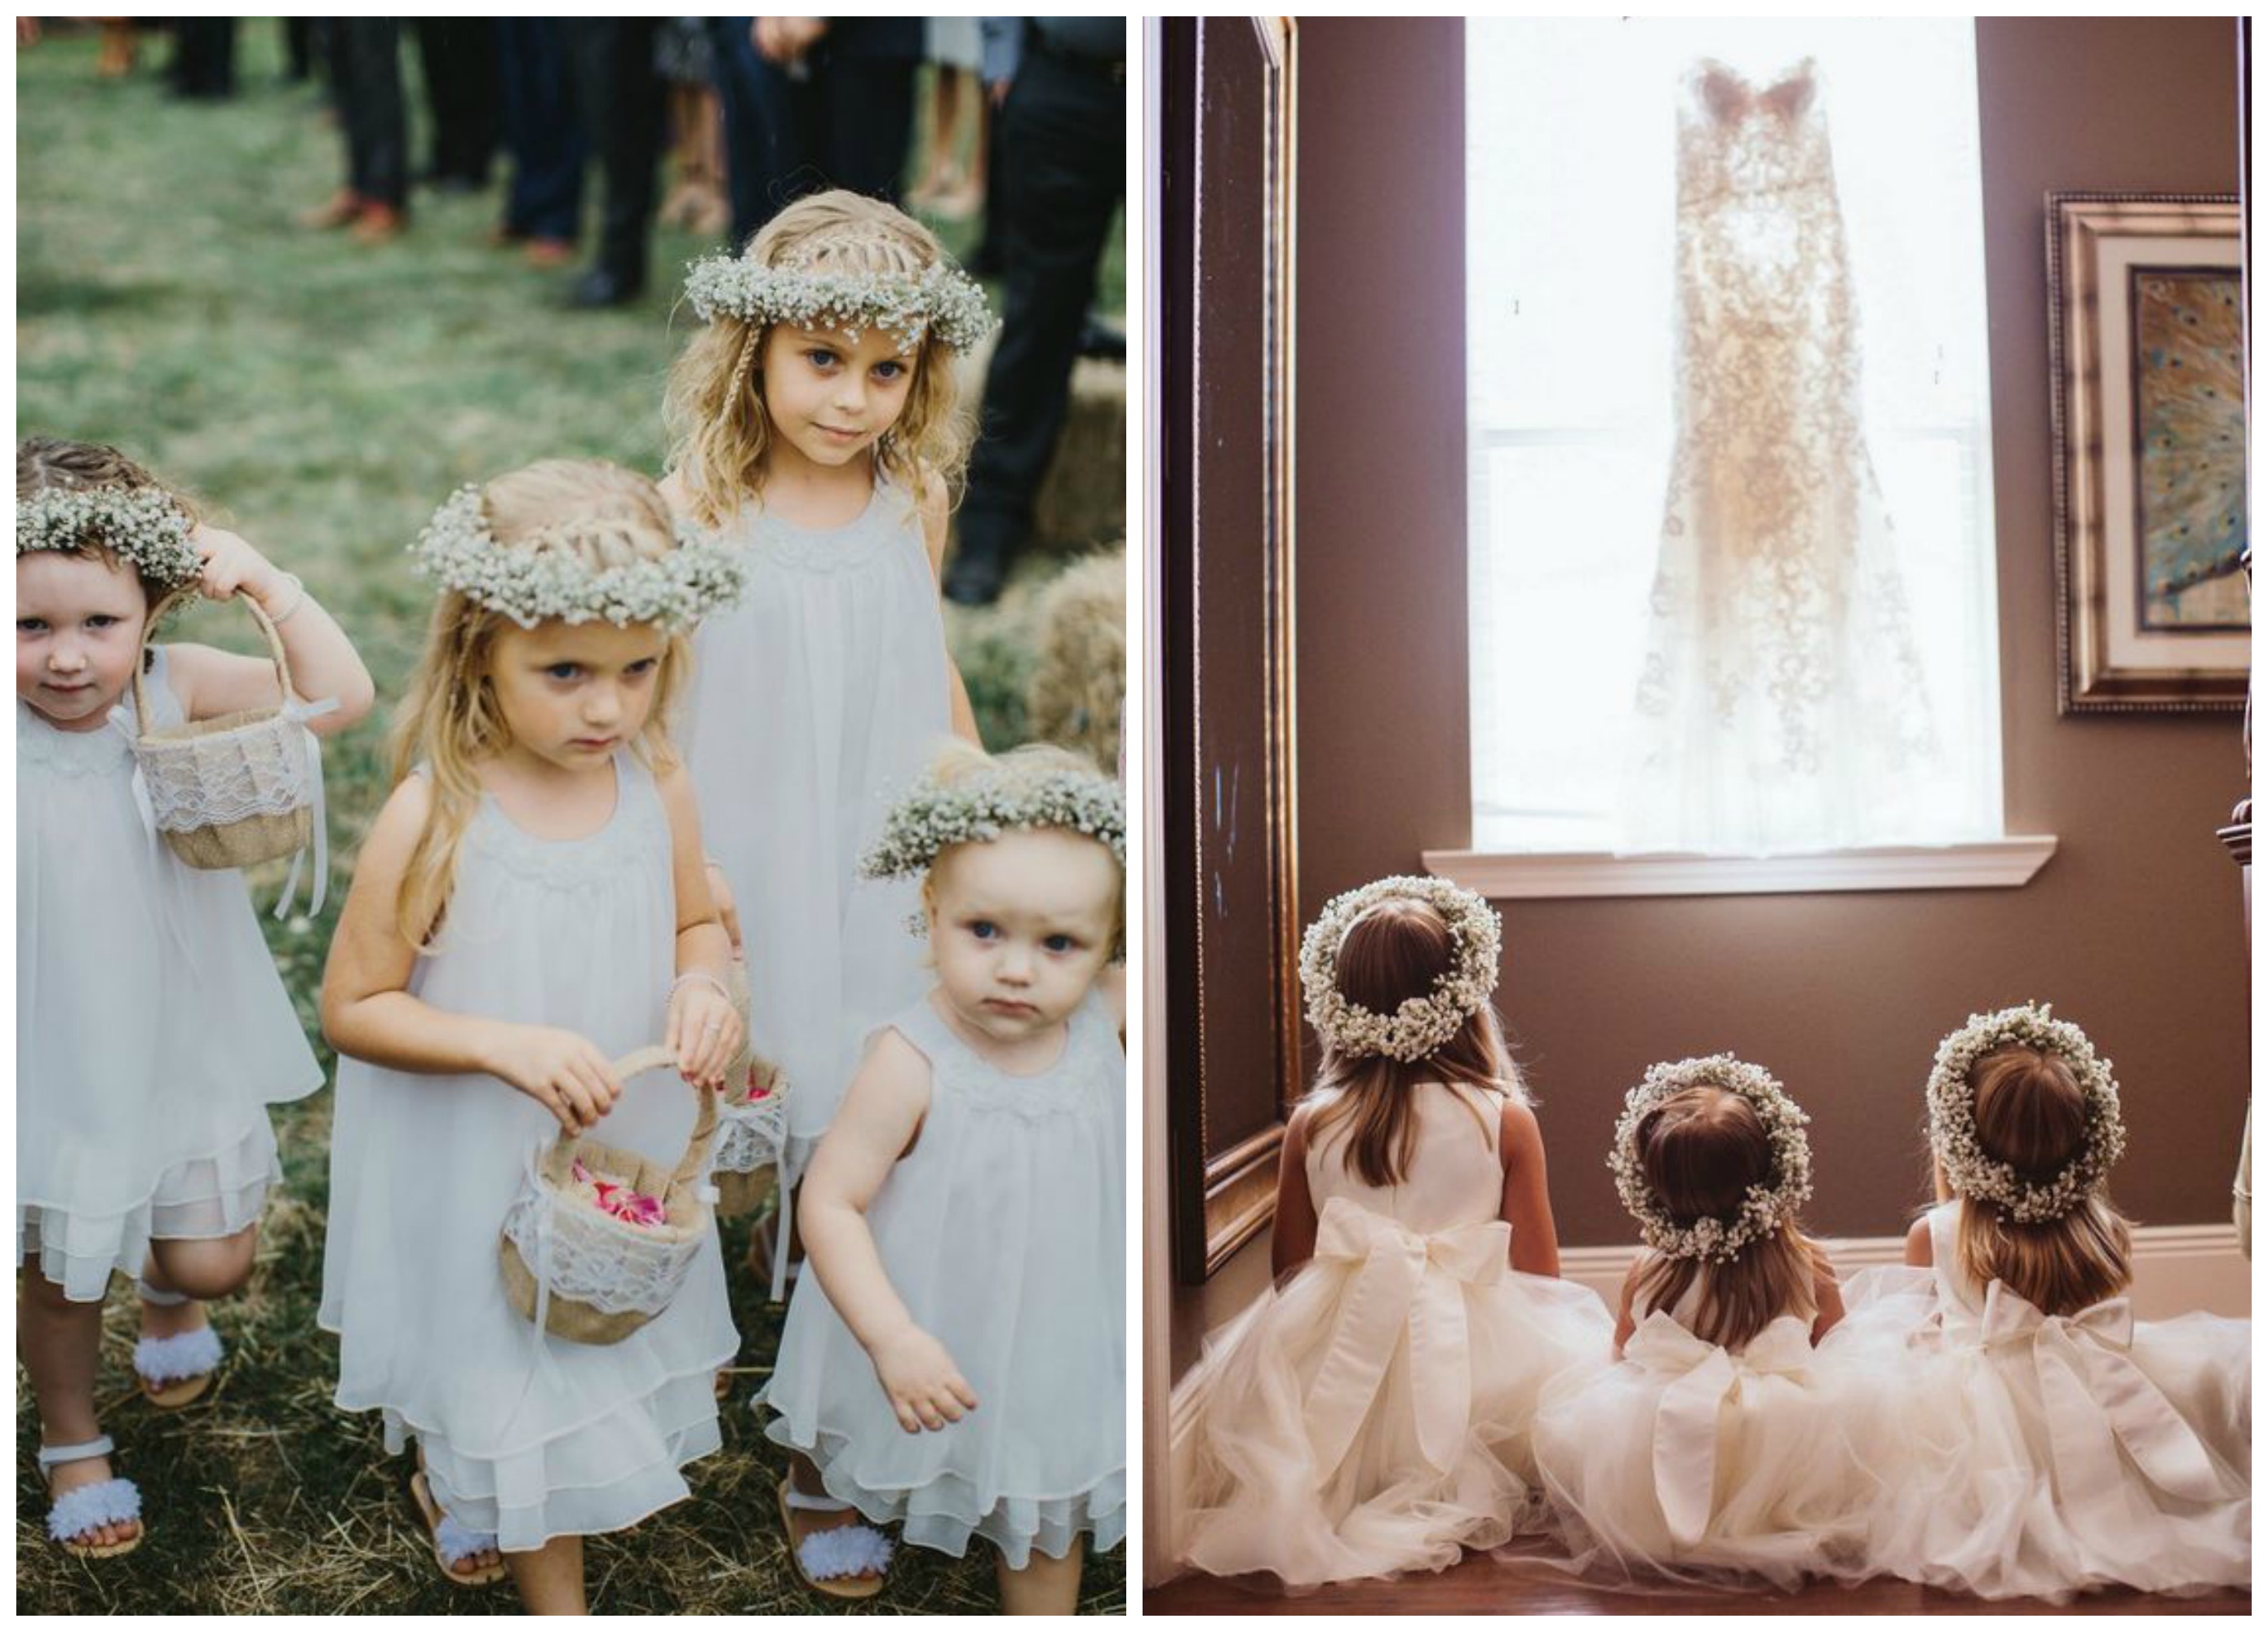 Baby's Breath Floral Crowns